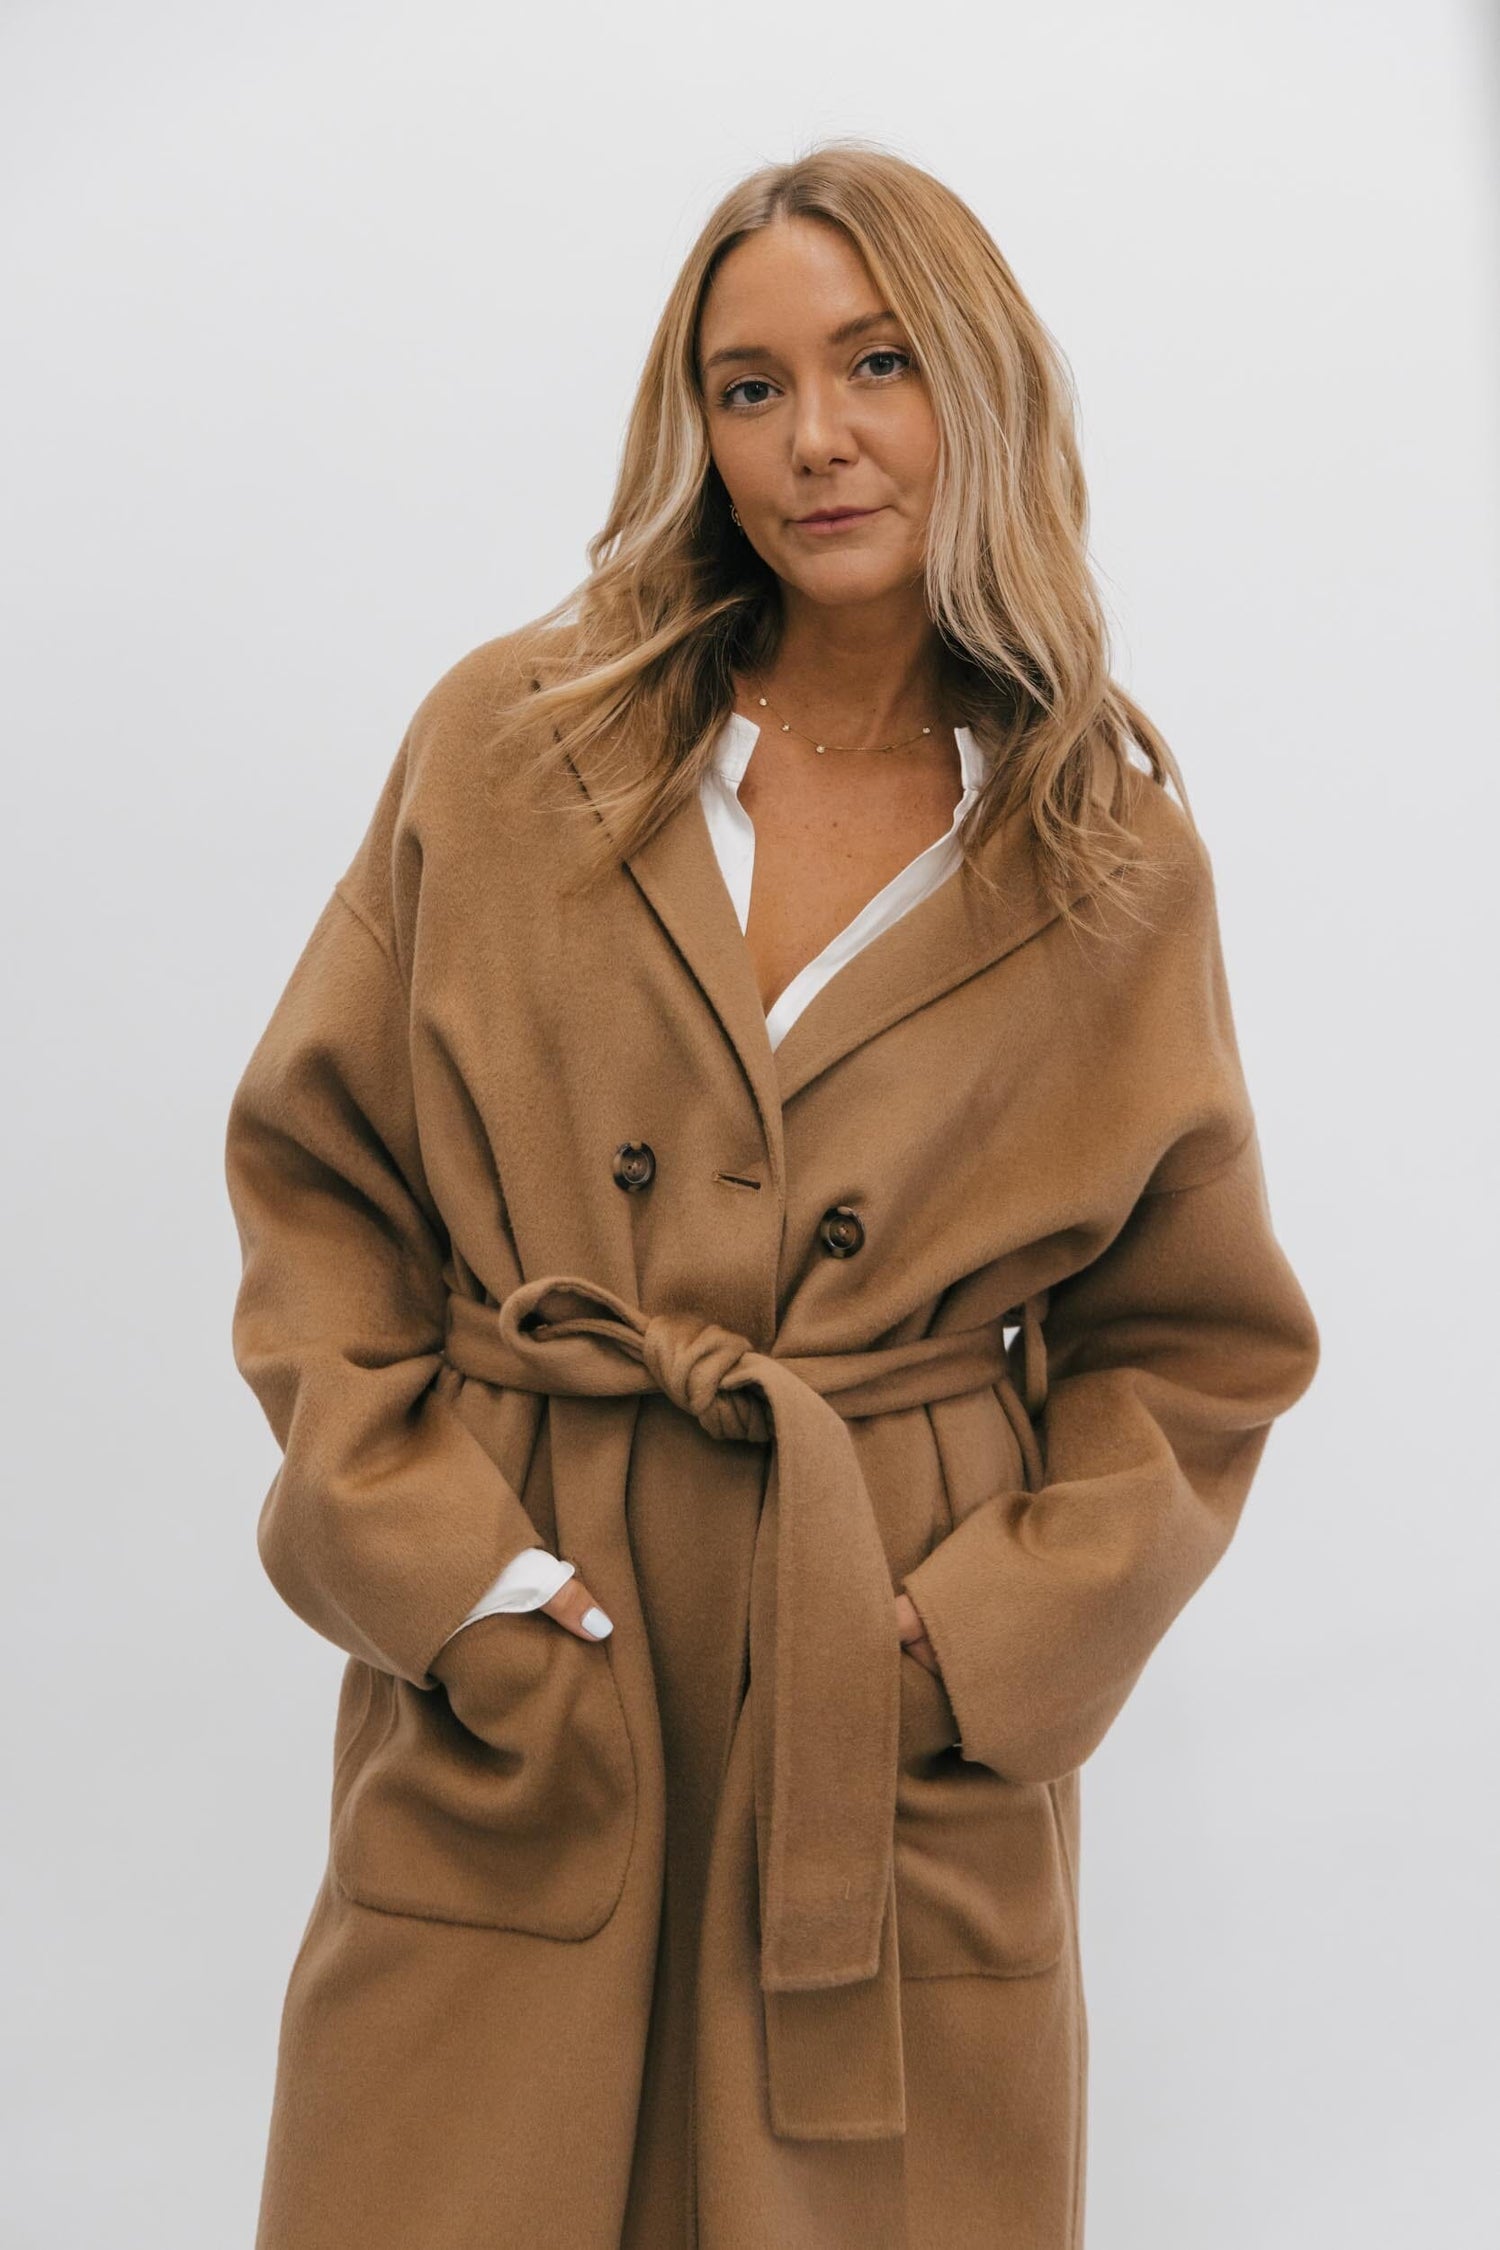 Dylan double-breasted wool and cashmere-blend coat